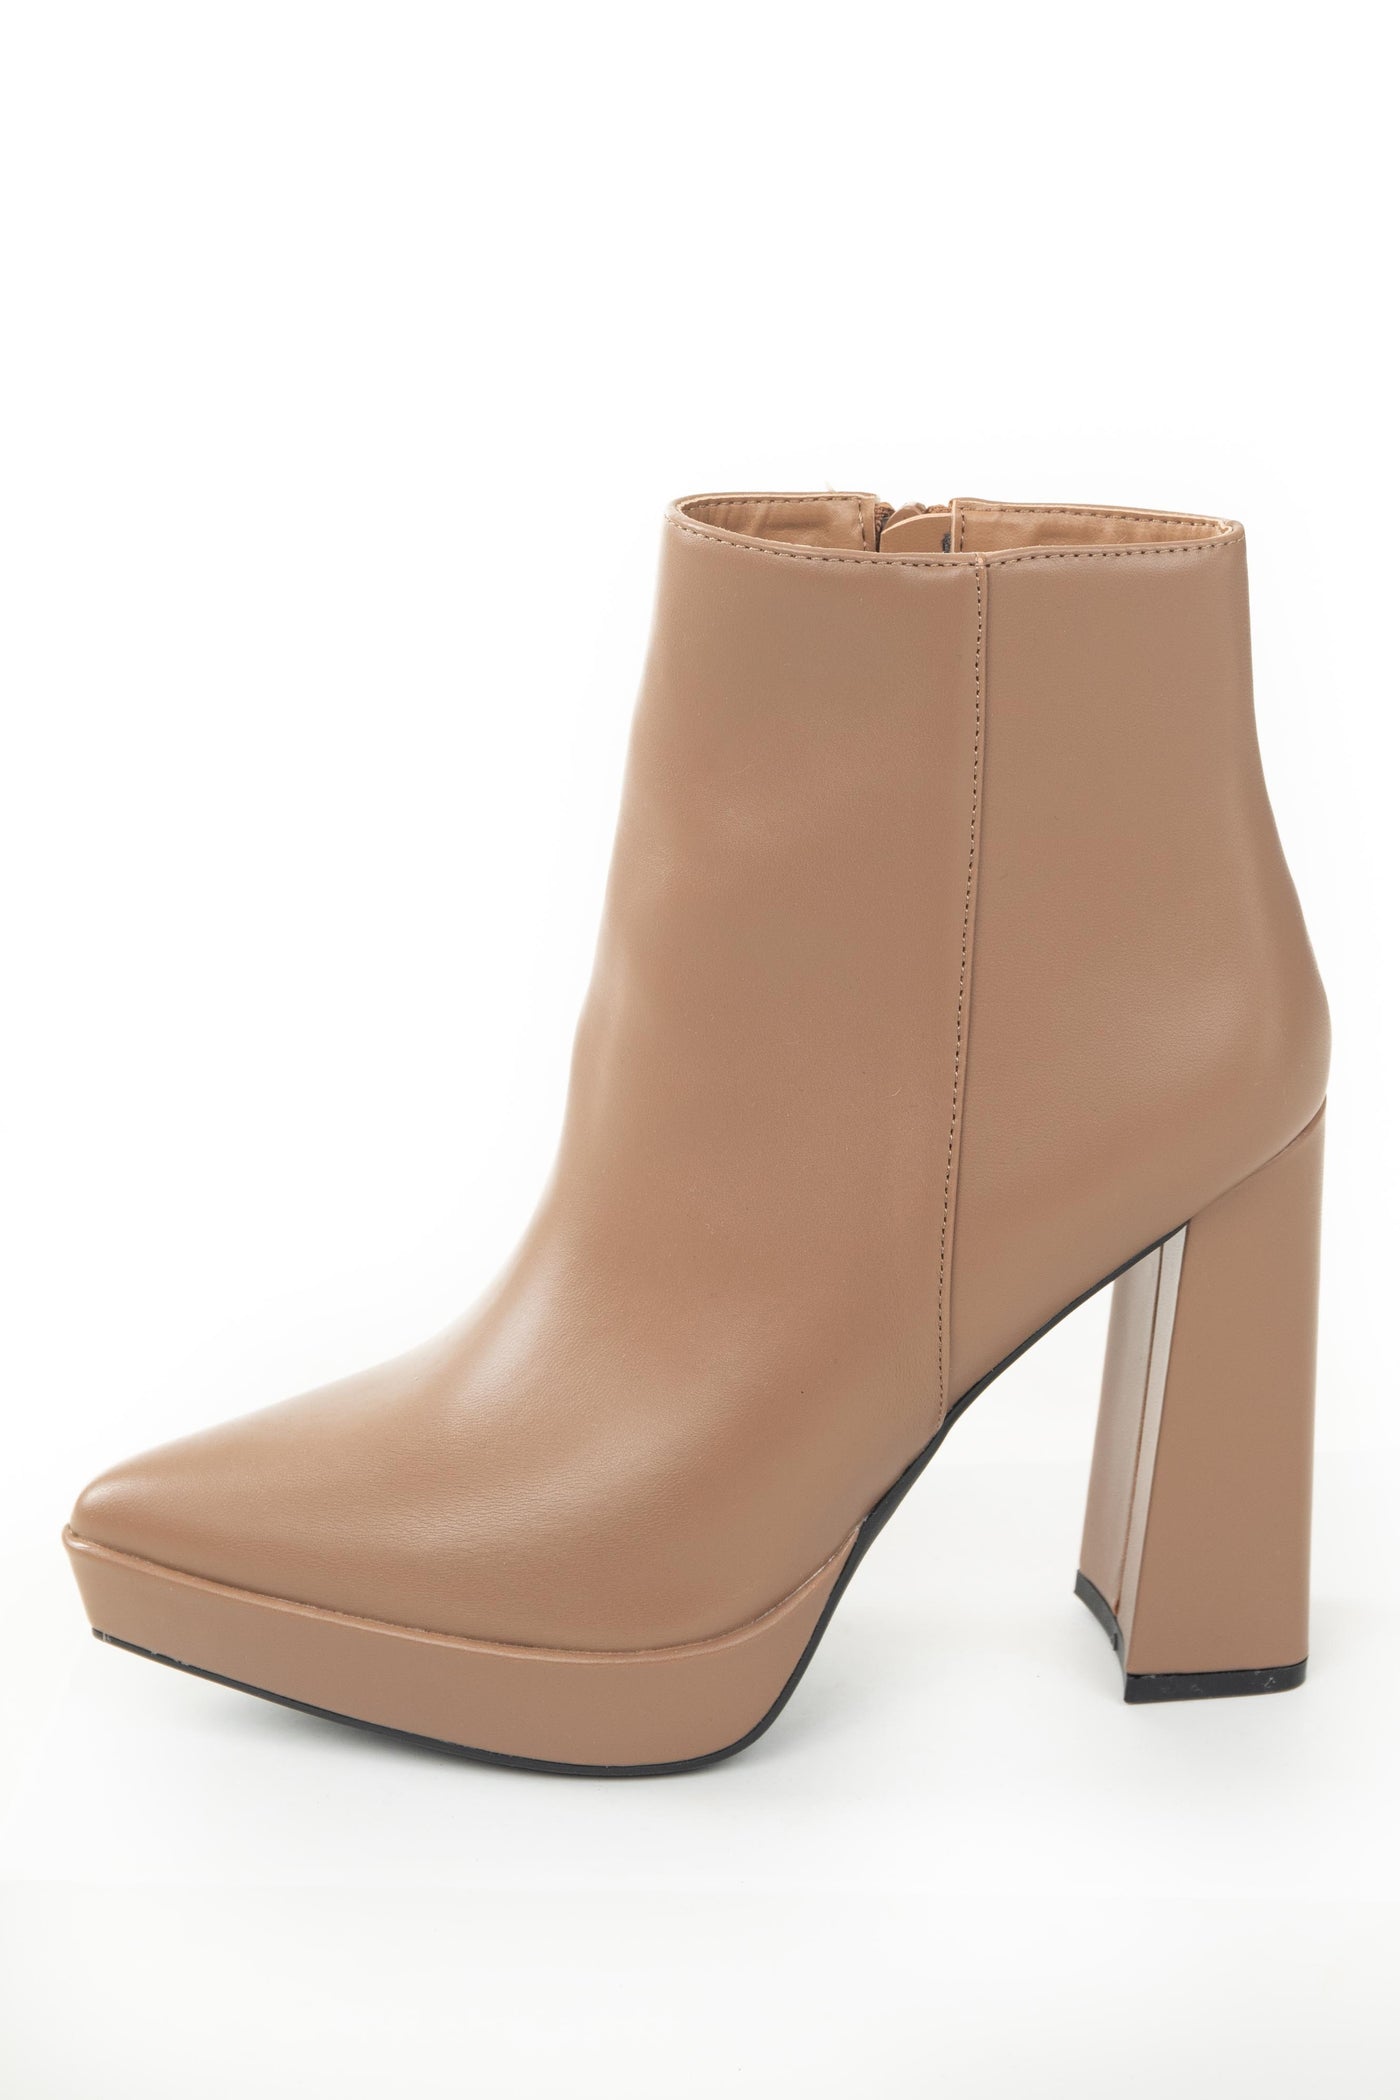 Sepia Faux Leather Flared Heel Pointed Toe Bootie